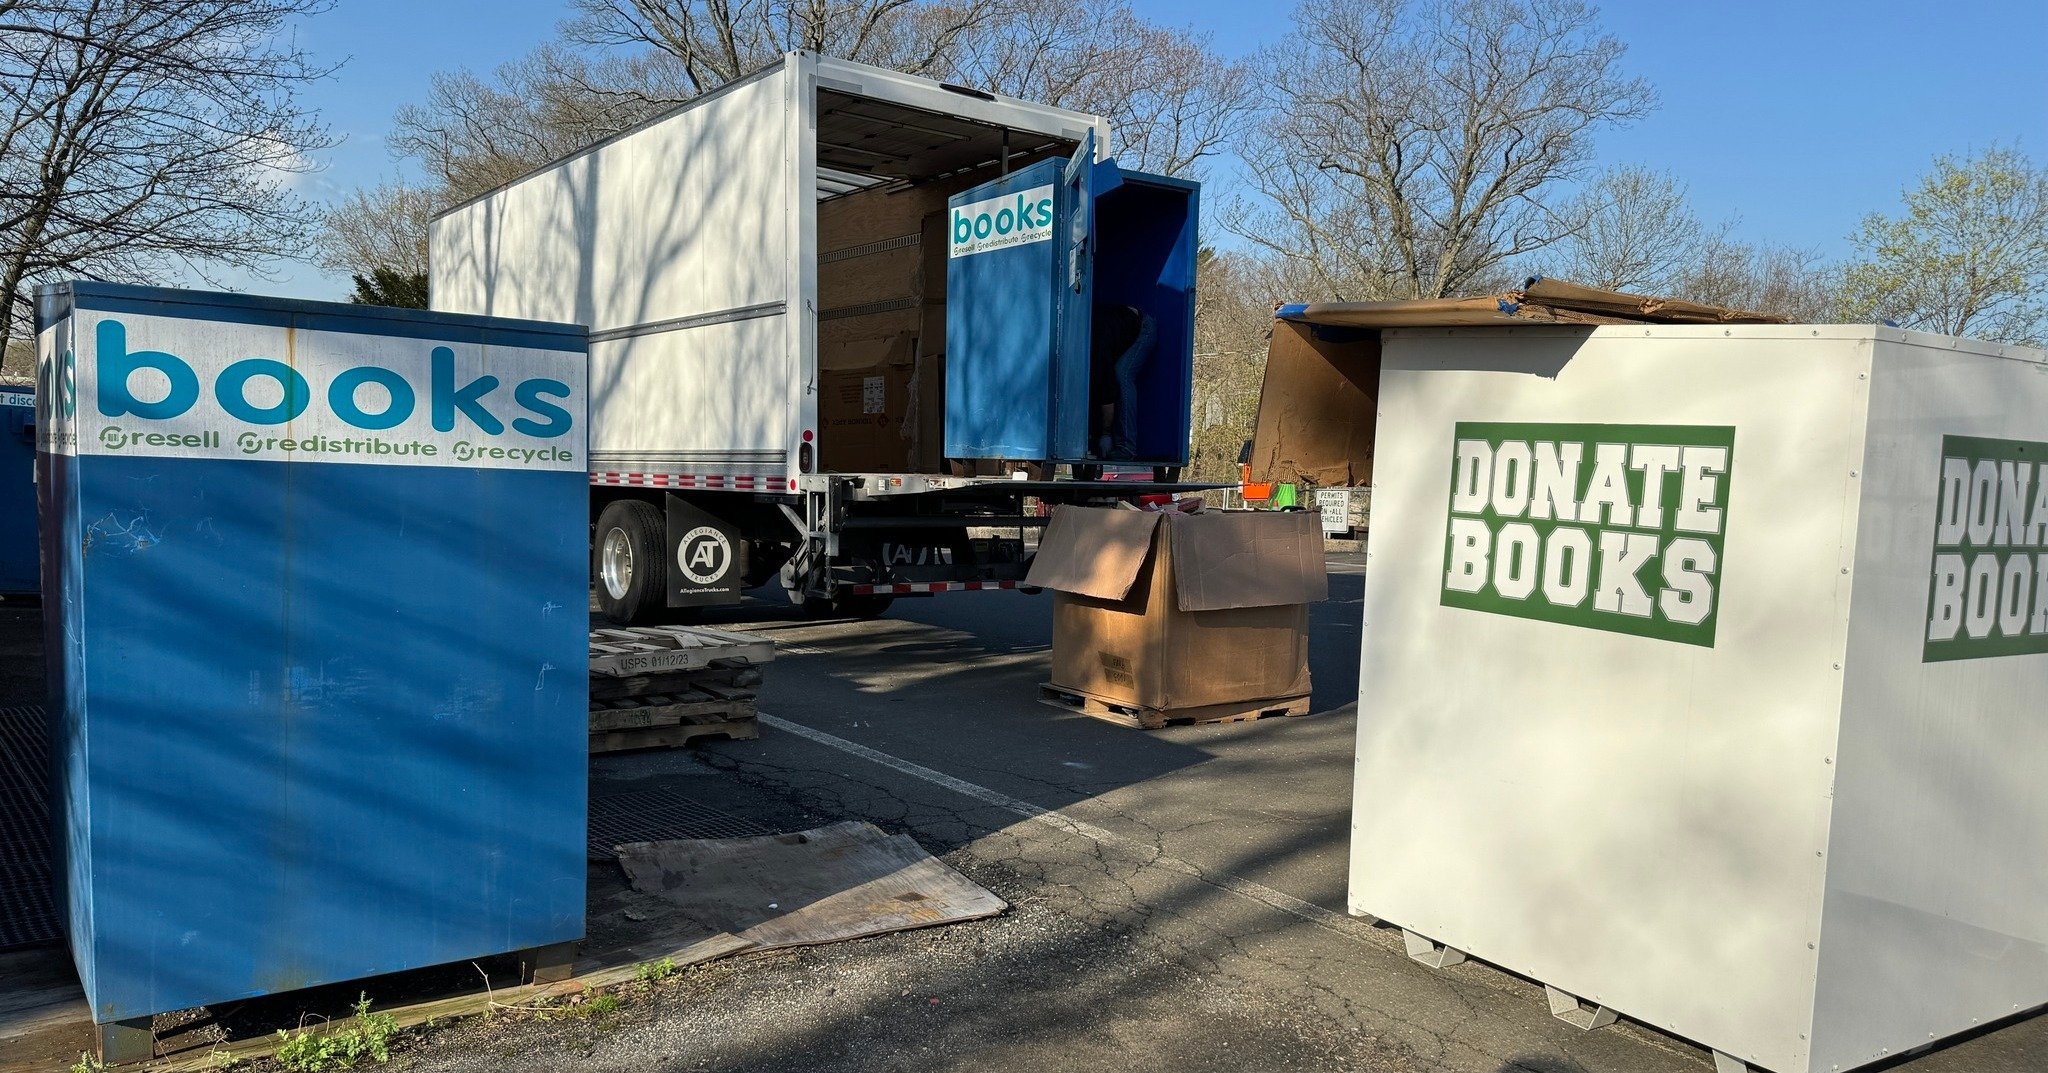 We have a new partner! We still prefer that you drop books on Friday or Saturday mornings, but if you can't make it you can donate your books in our new white bins.
@baystatebooks 

 #greenwichbook #Greenwich #greenwichreadstogether #greenwichbookswa